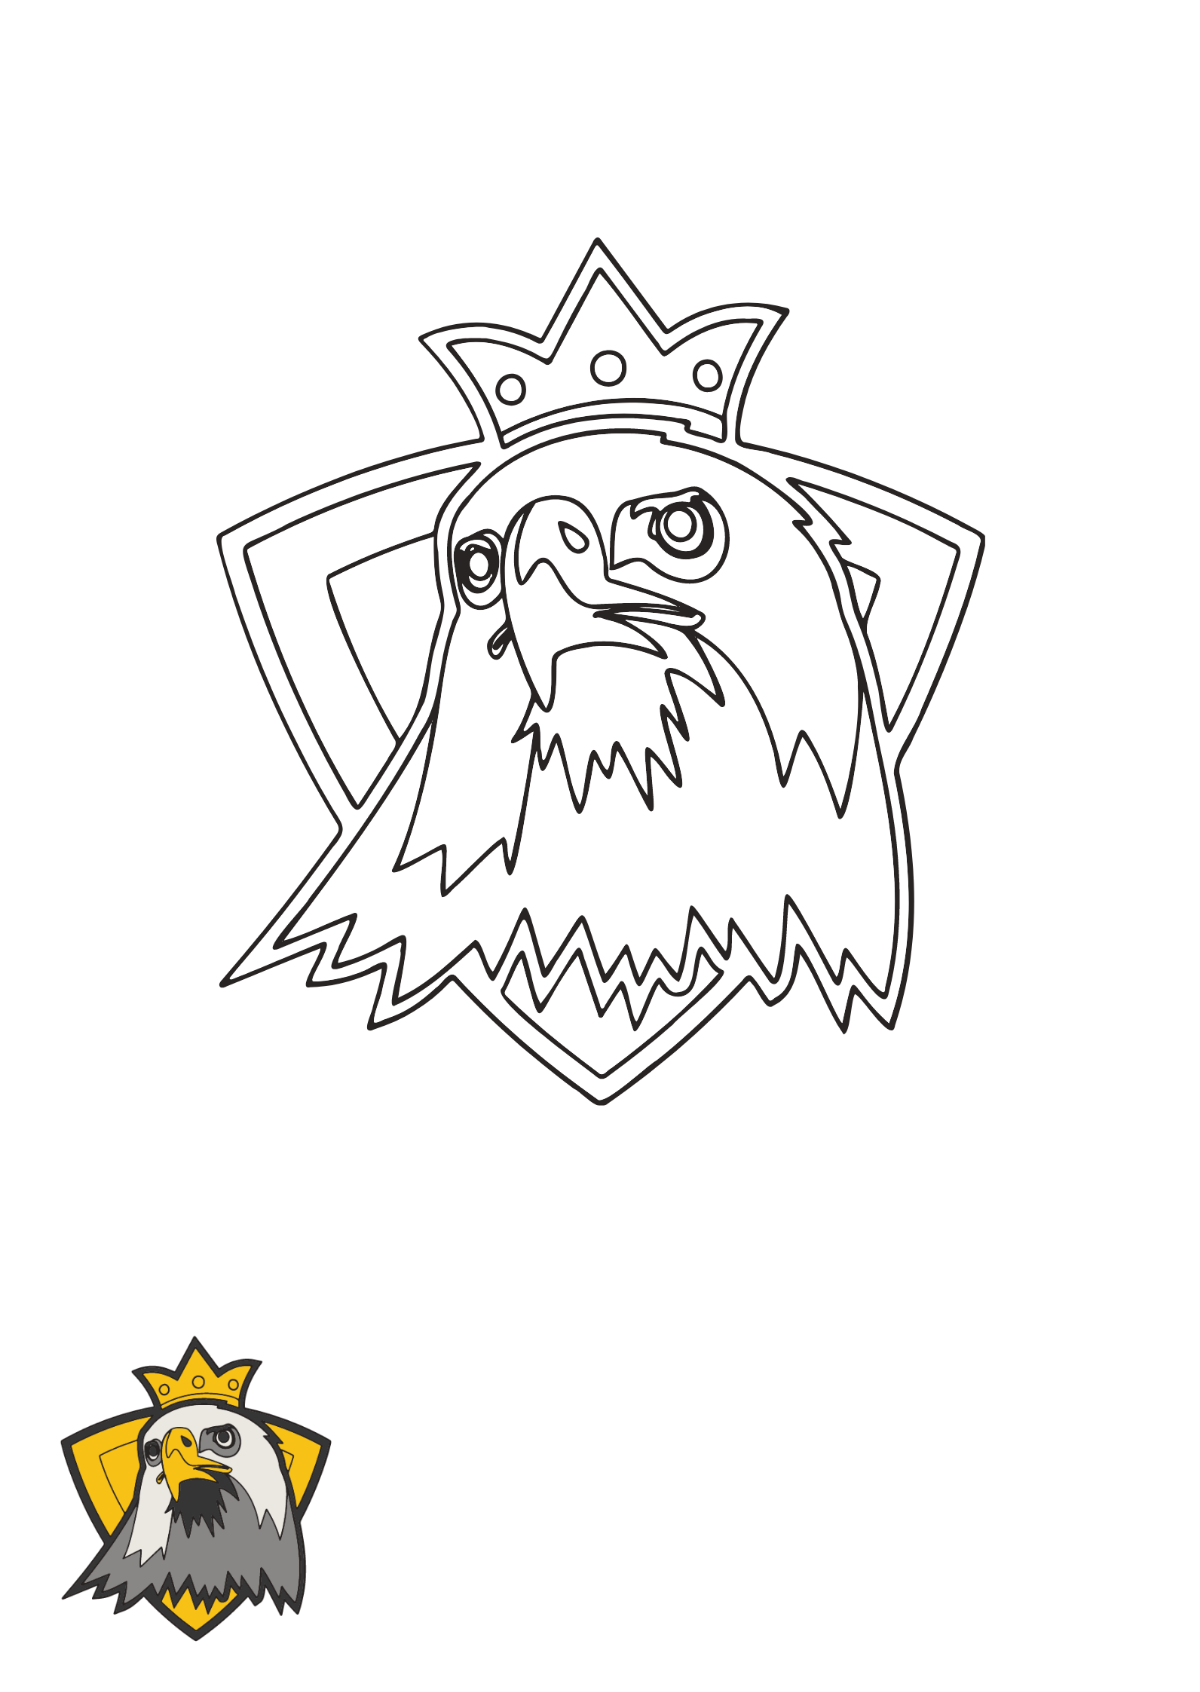 King Eagle coloring page